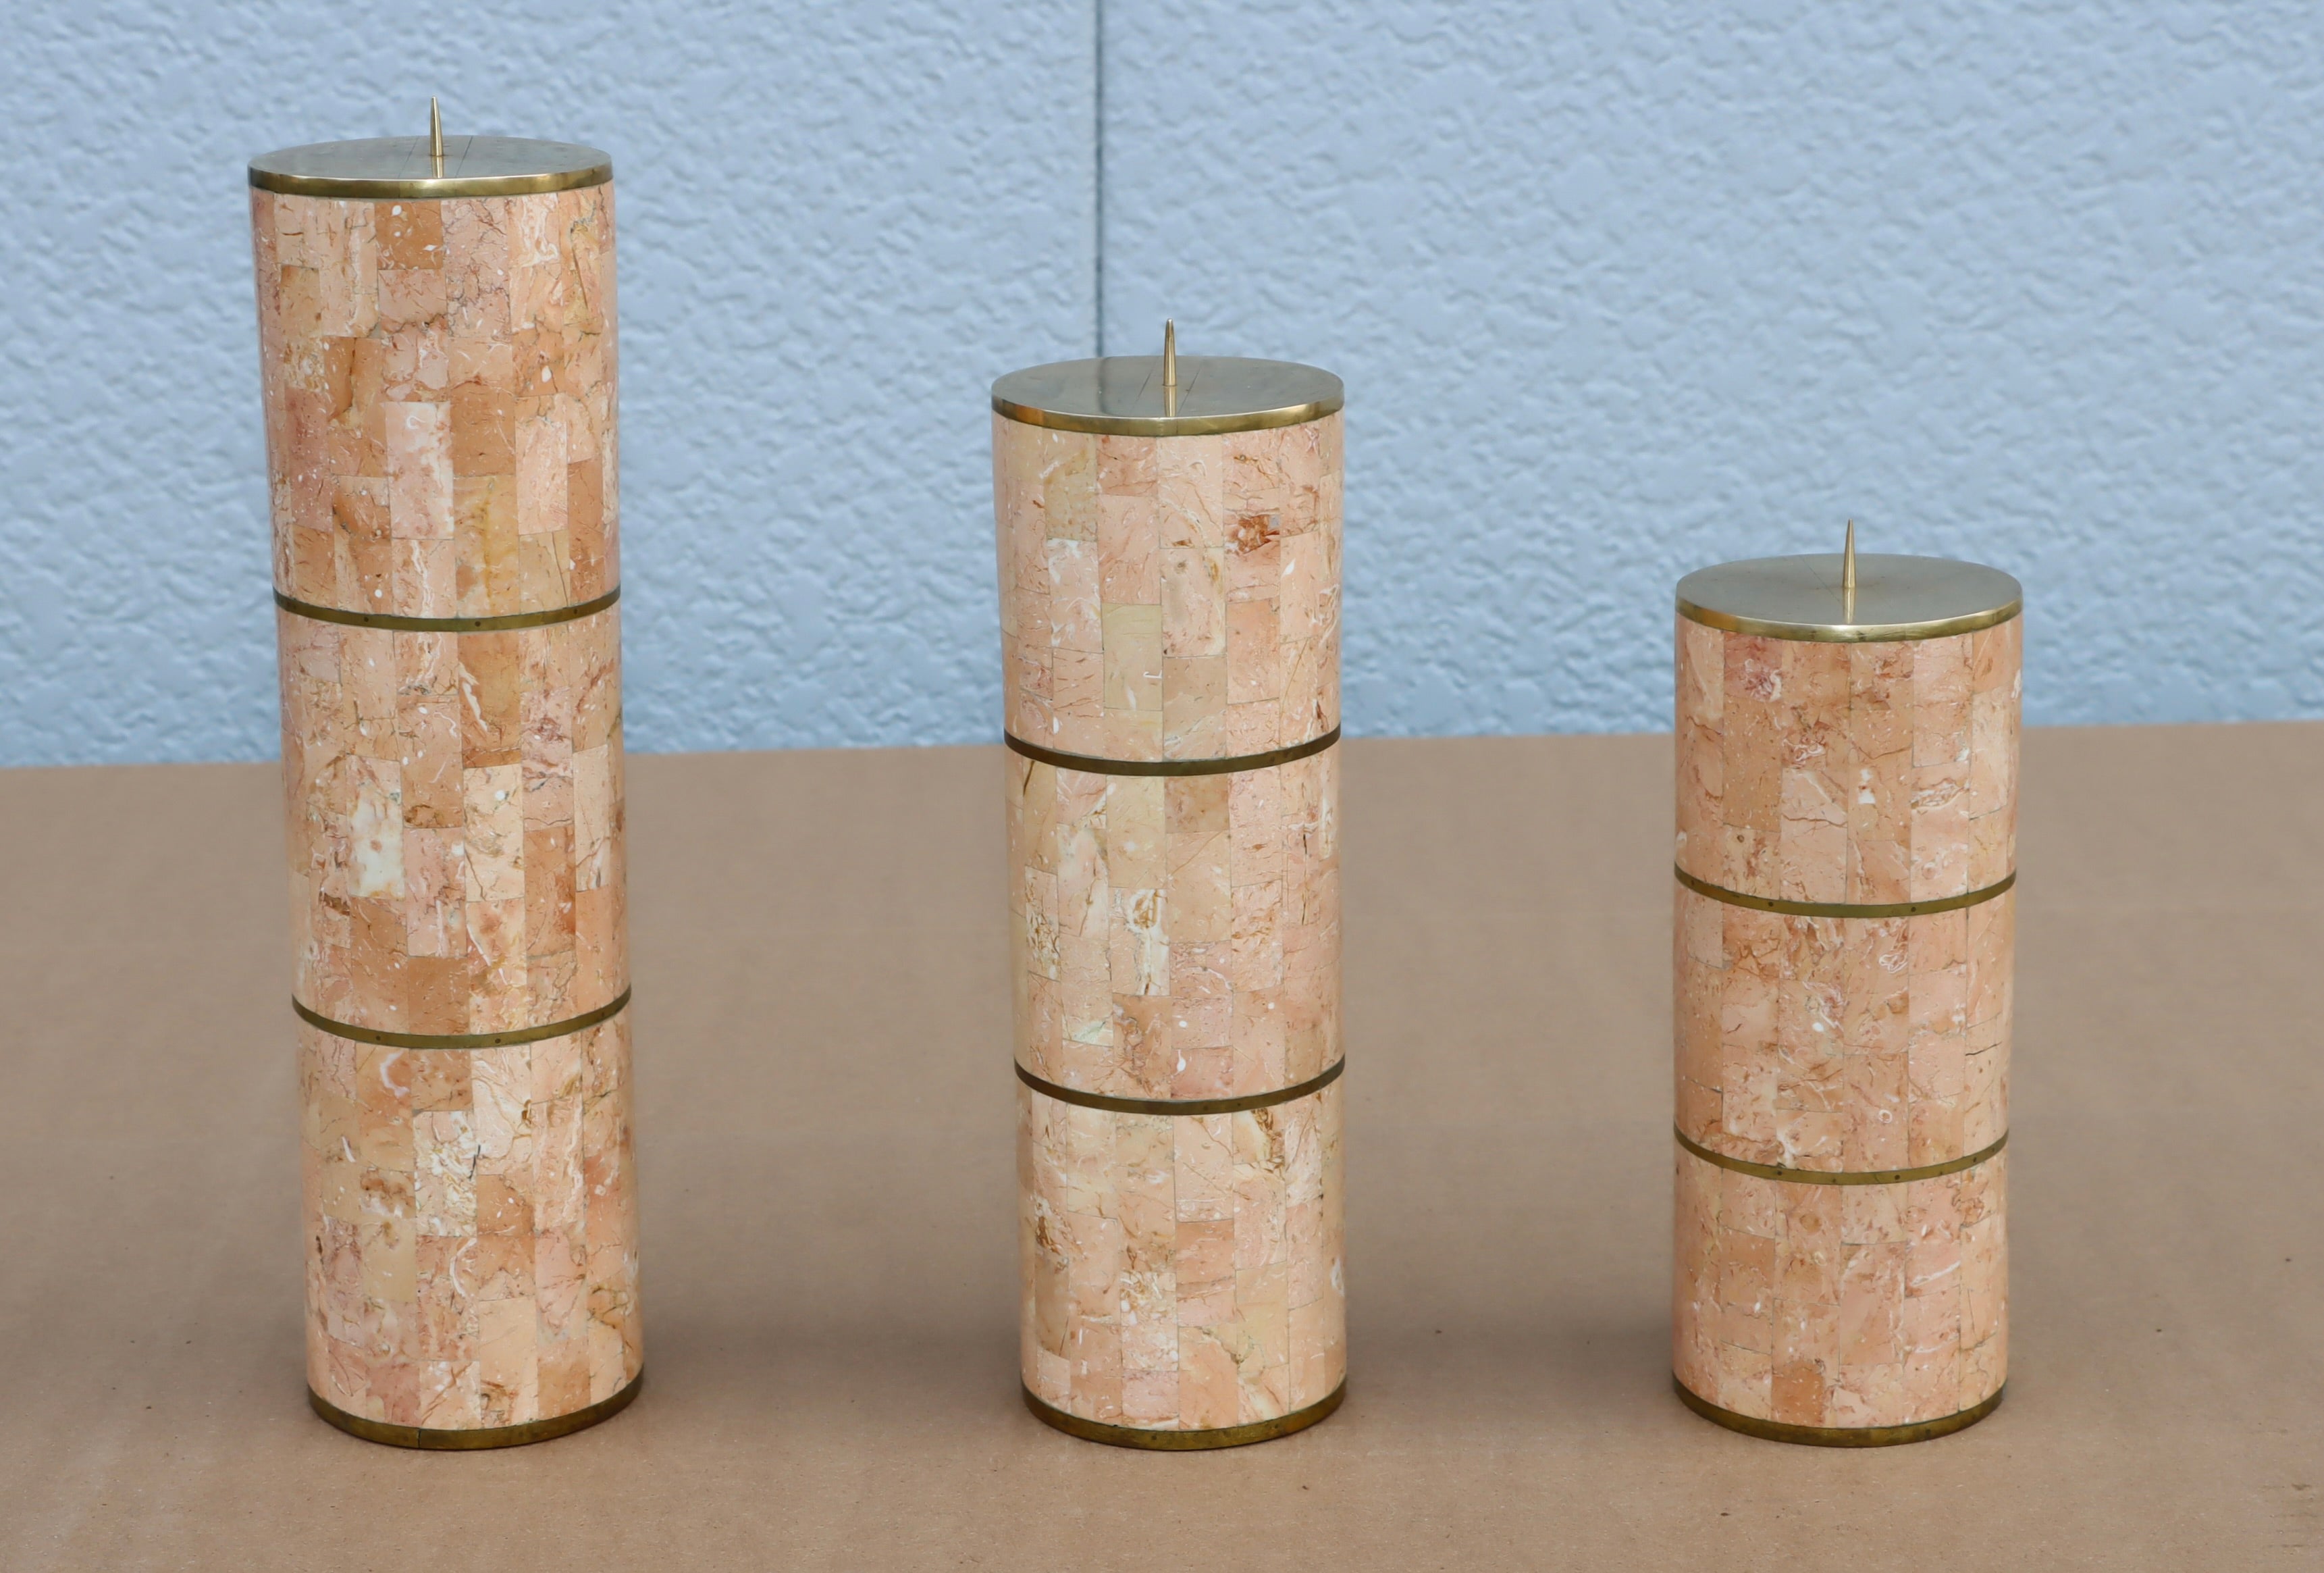 Beautiful set of 3 1980';s Tesselated stone and brass candle holders by Maitland Smith, in vintage original condition with some wear and patina due to age and use.

Medium candle holder height 10''
Small candle holder height 8'' 